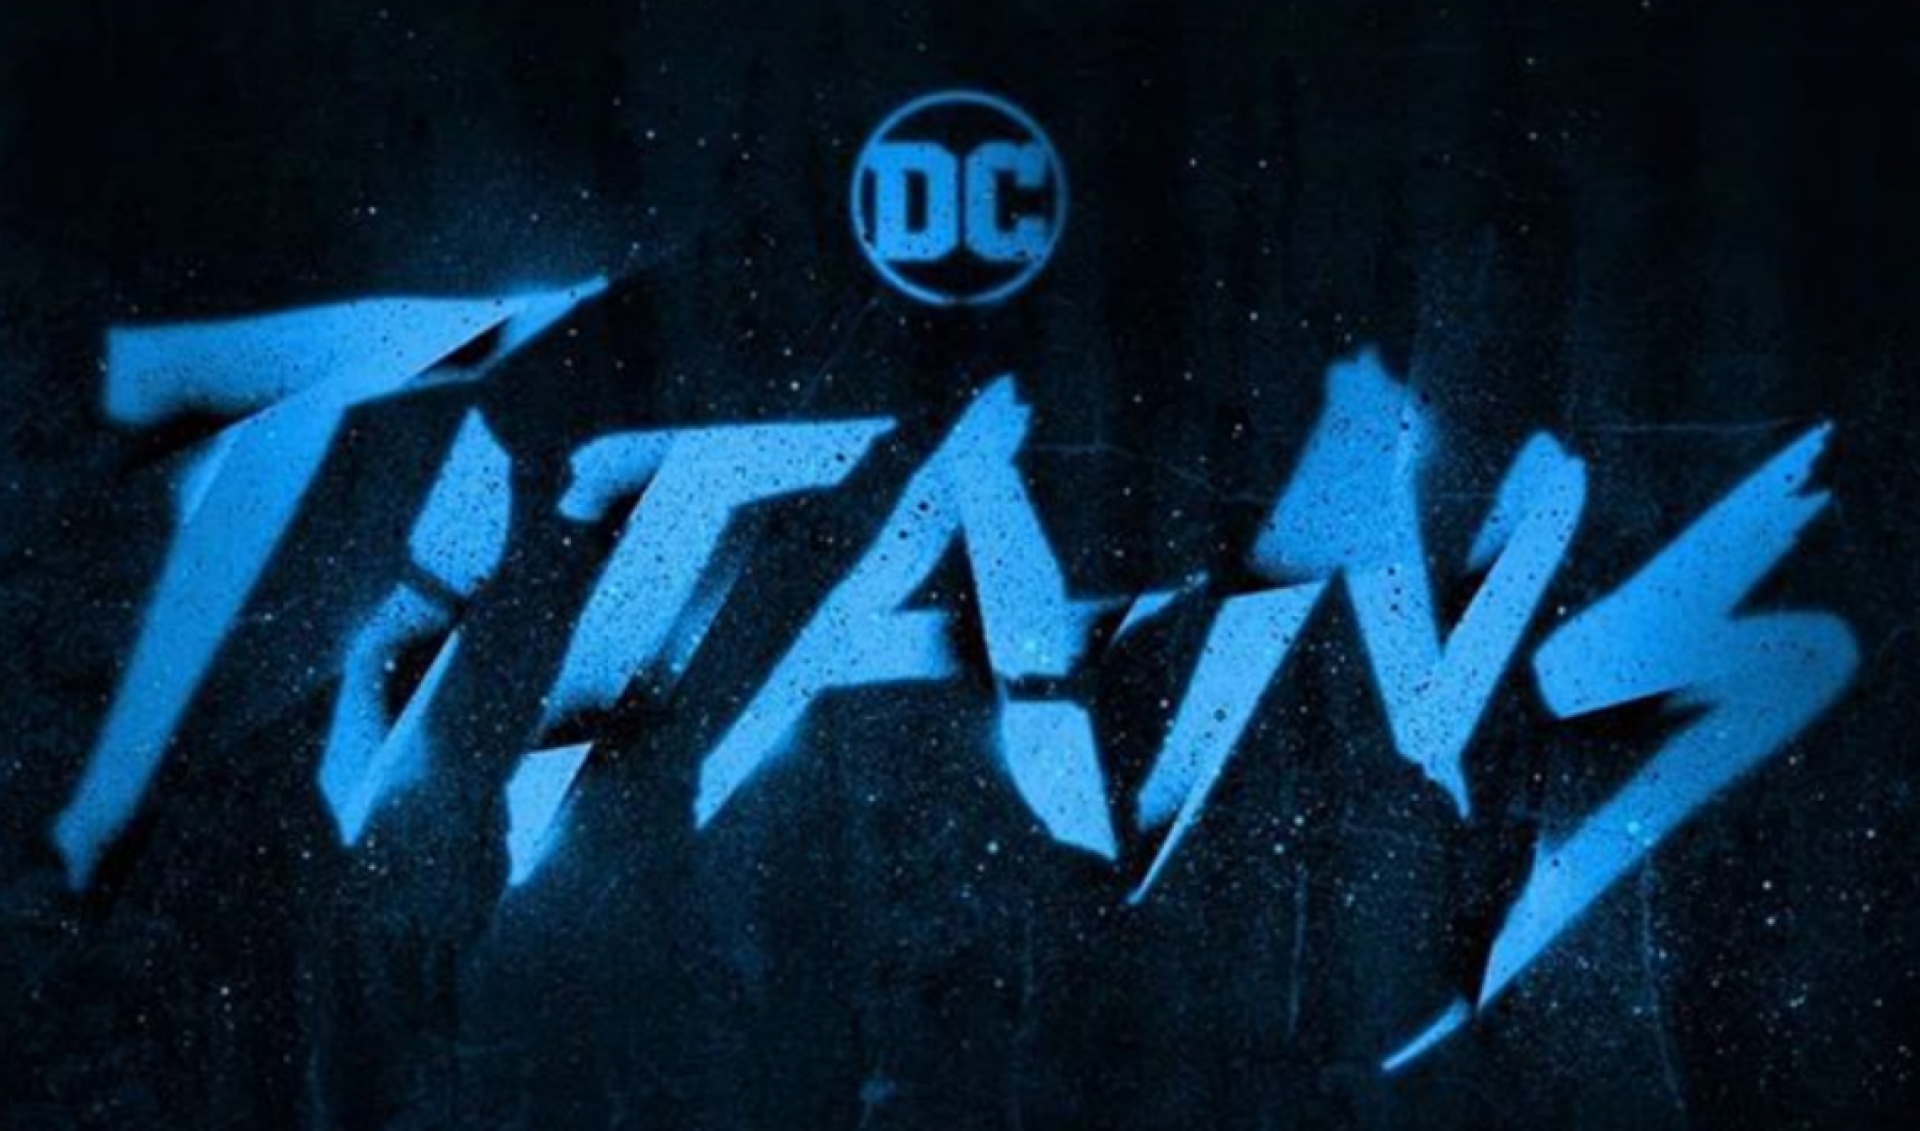 Warner Bros. And DC Comics’ ‘DC Universe’ Streaming Service Launching In Beta This Month